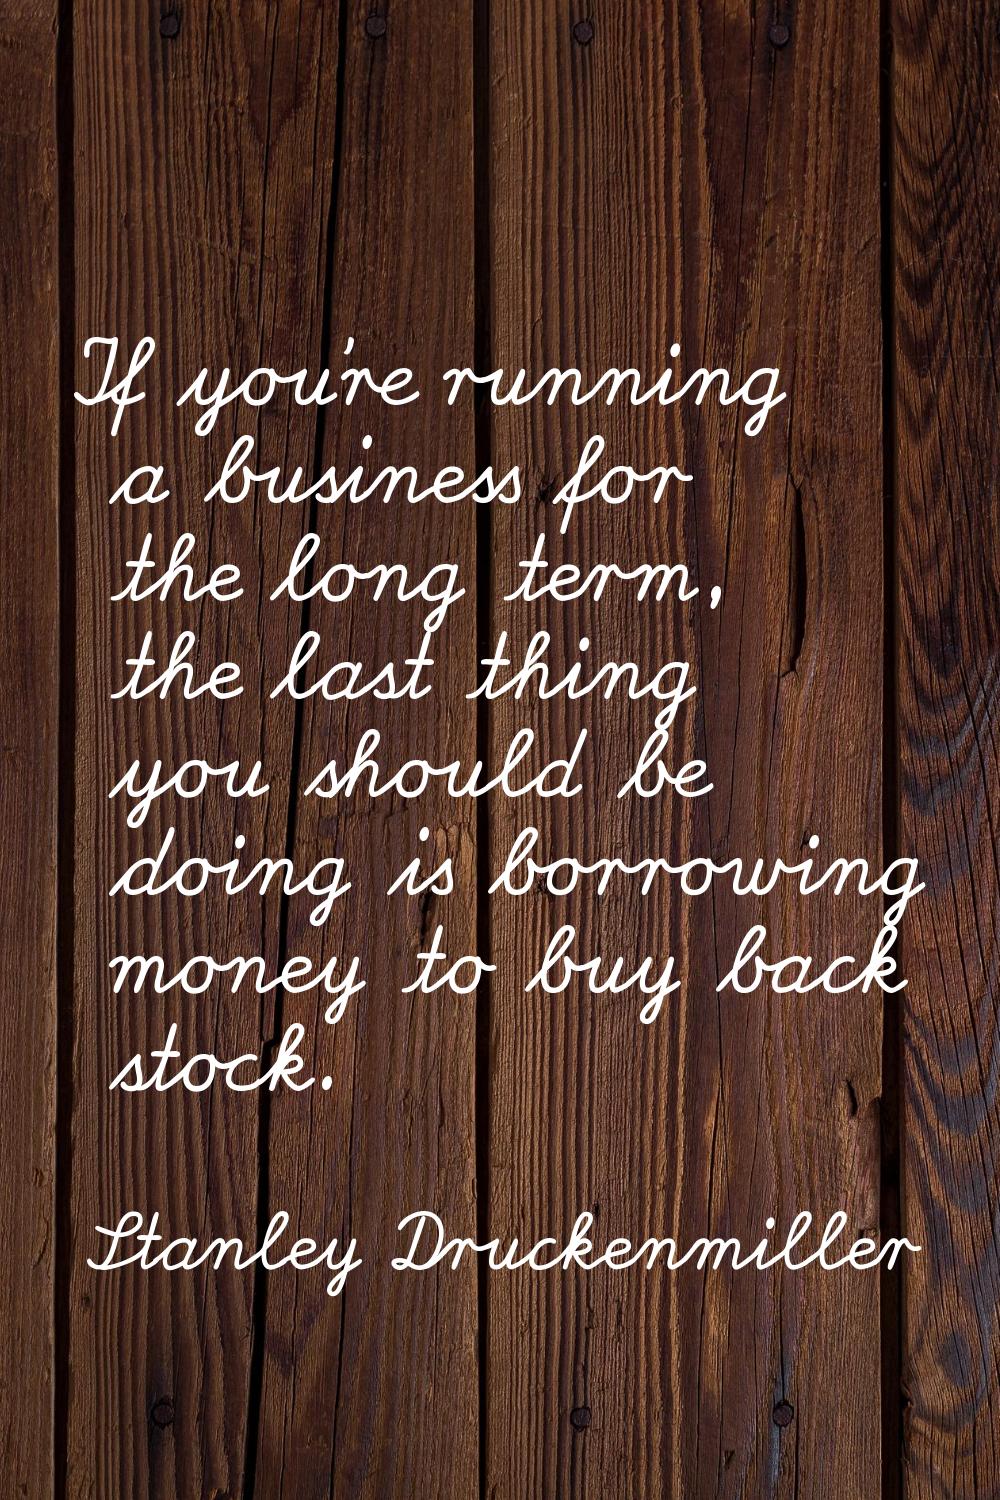 If you're running a business for the long term, the last thing you should be doing is borrowing mon